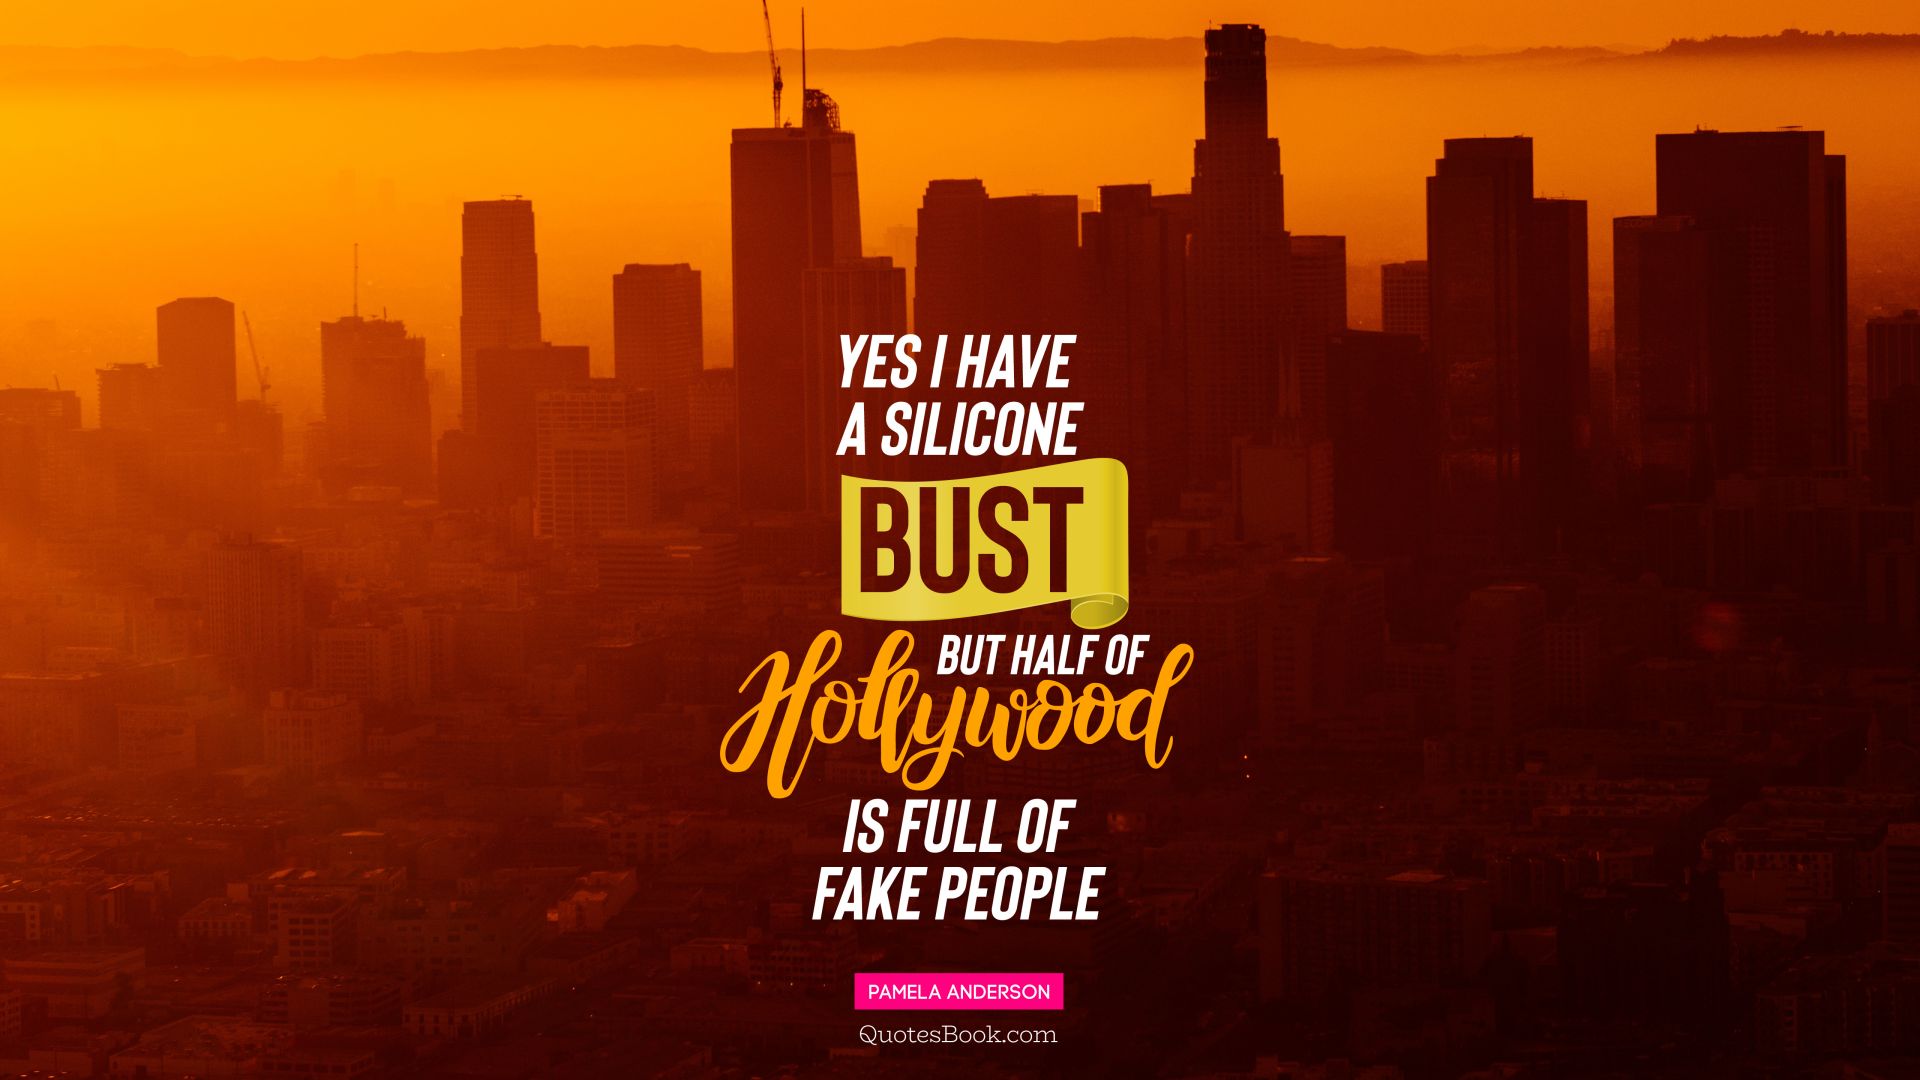 Yes I Have A Silicone Bust But Half Of Hollywood Is - Poster - HD Wallpaper 